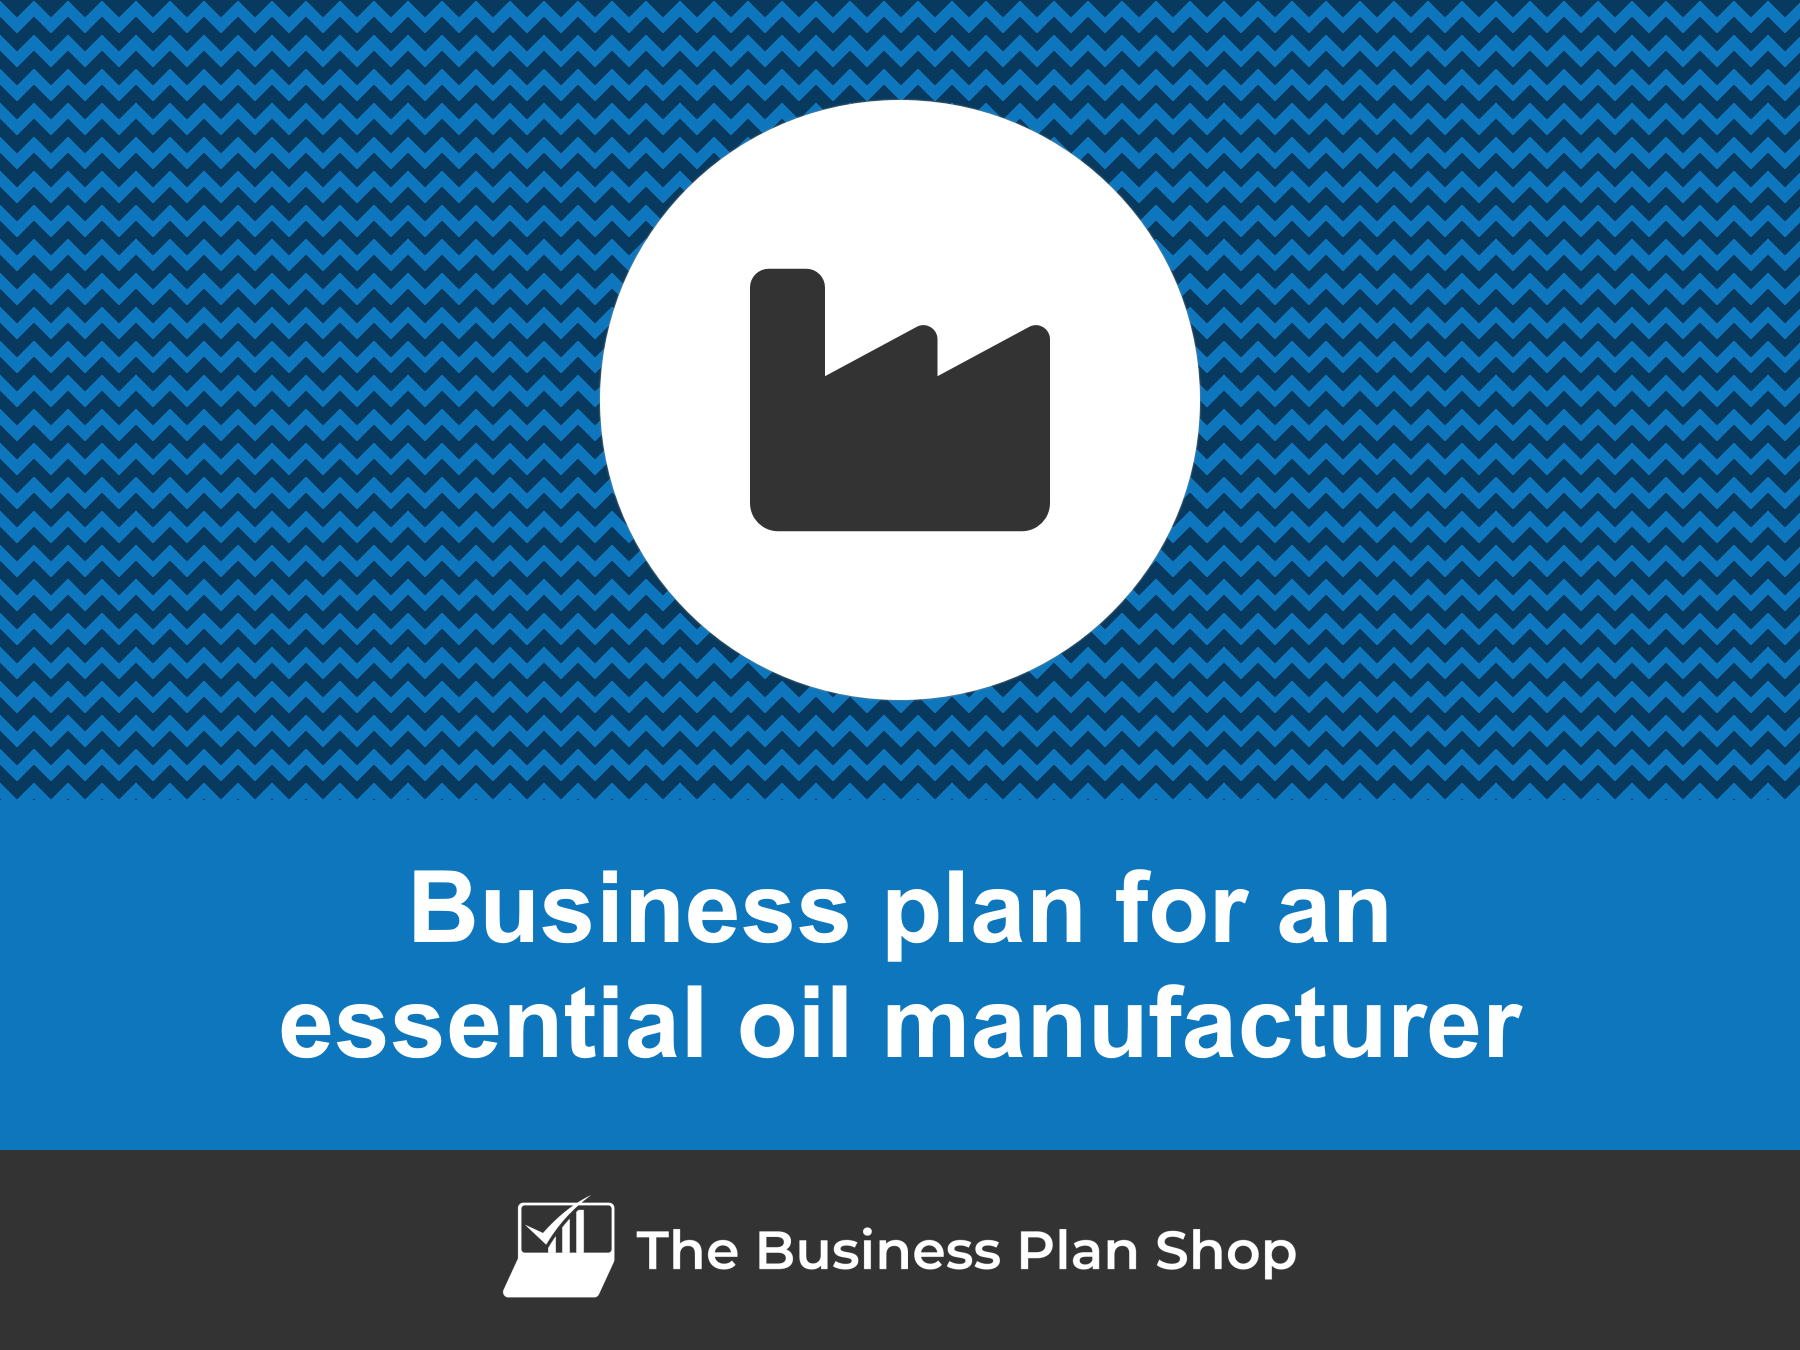 How to write a business plan for an essential oil manufacturer?